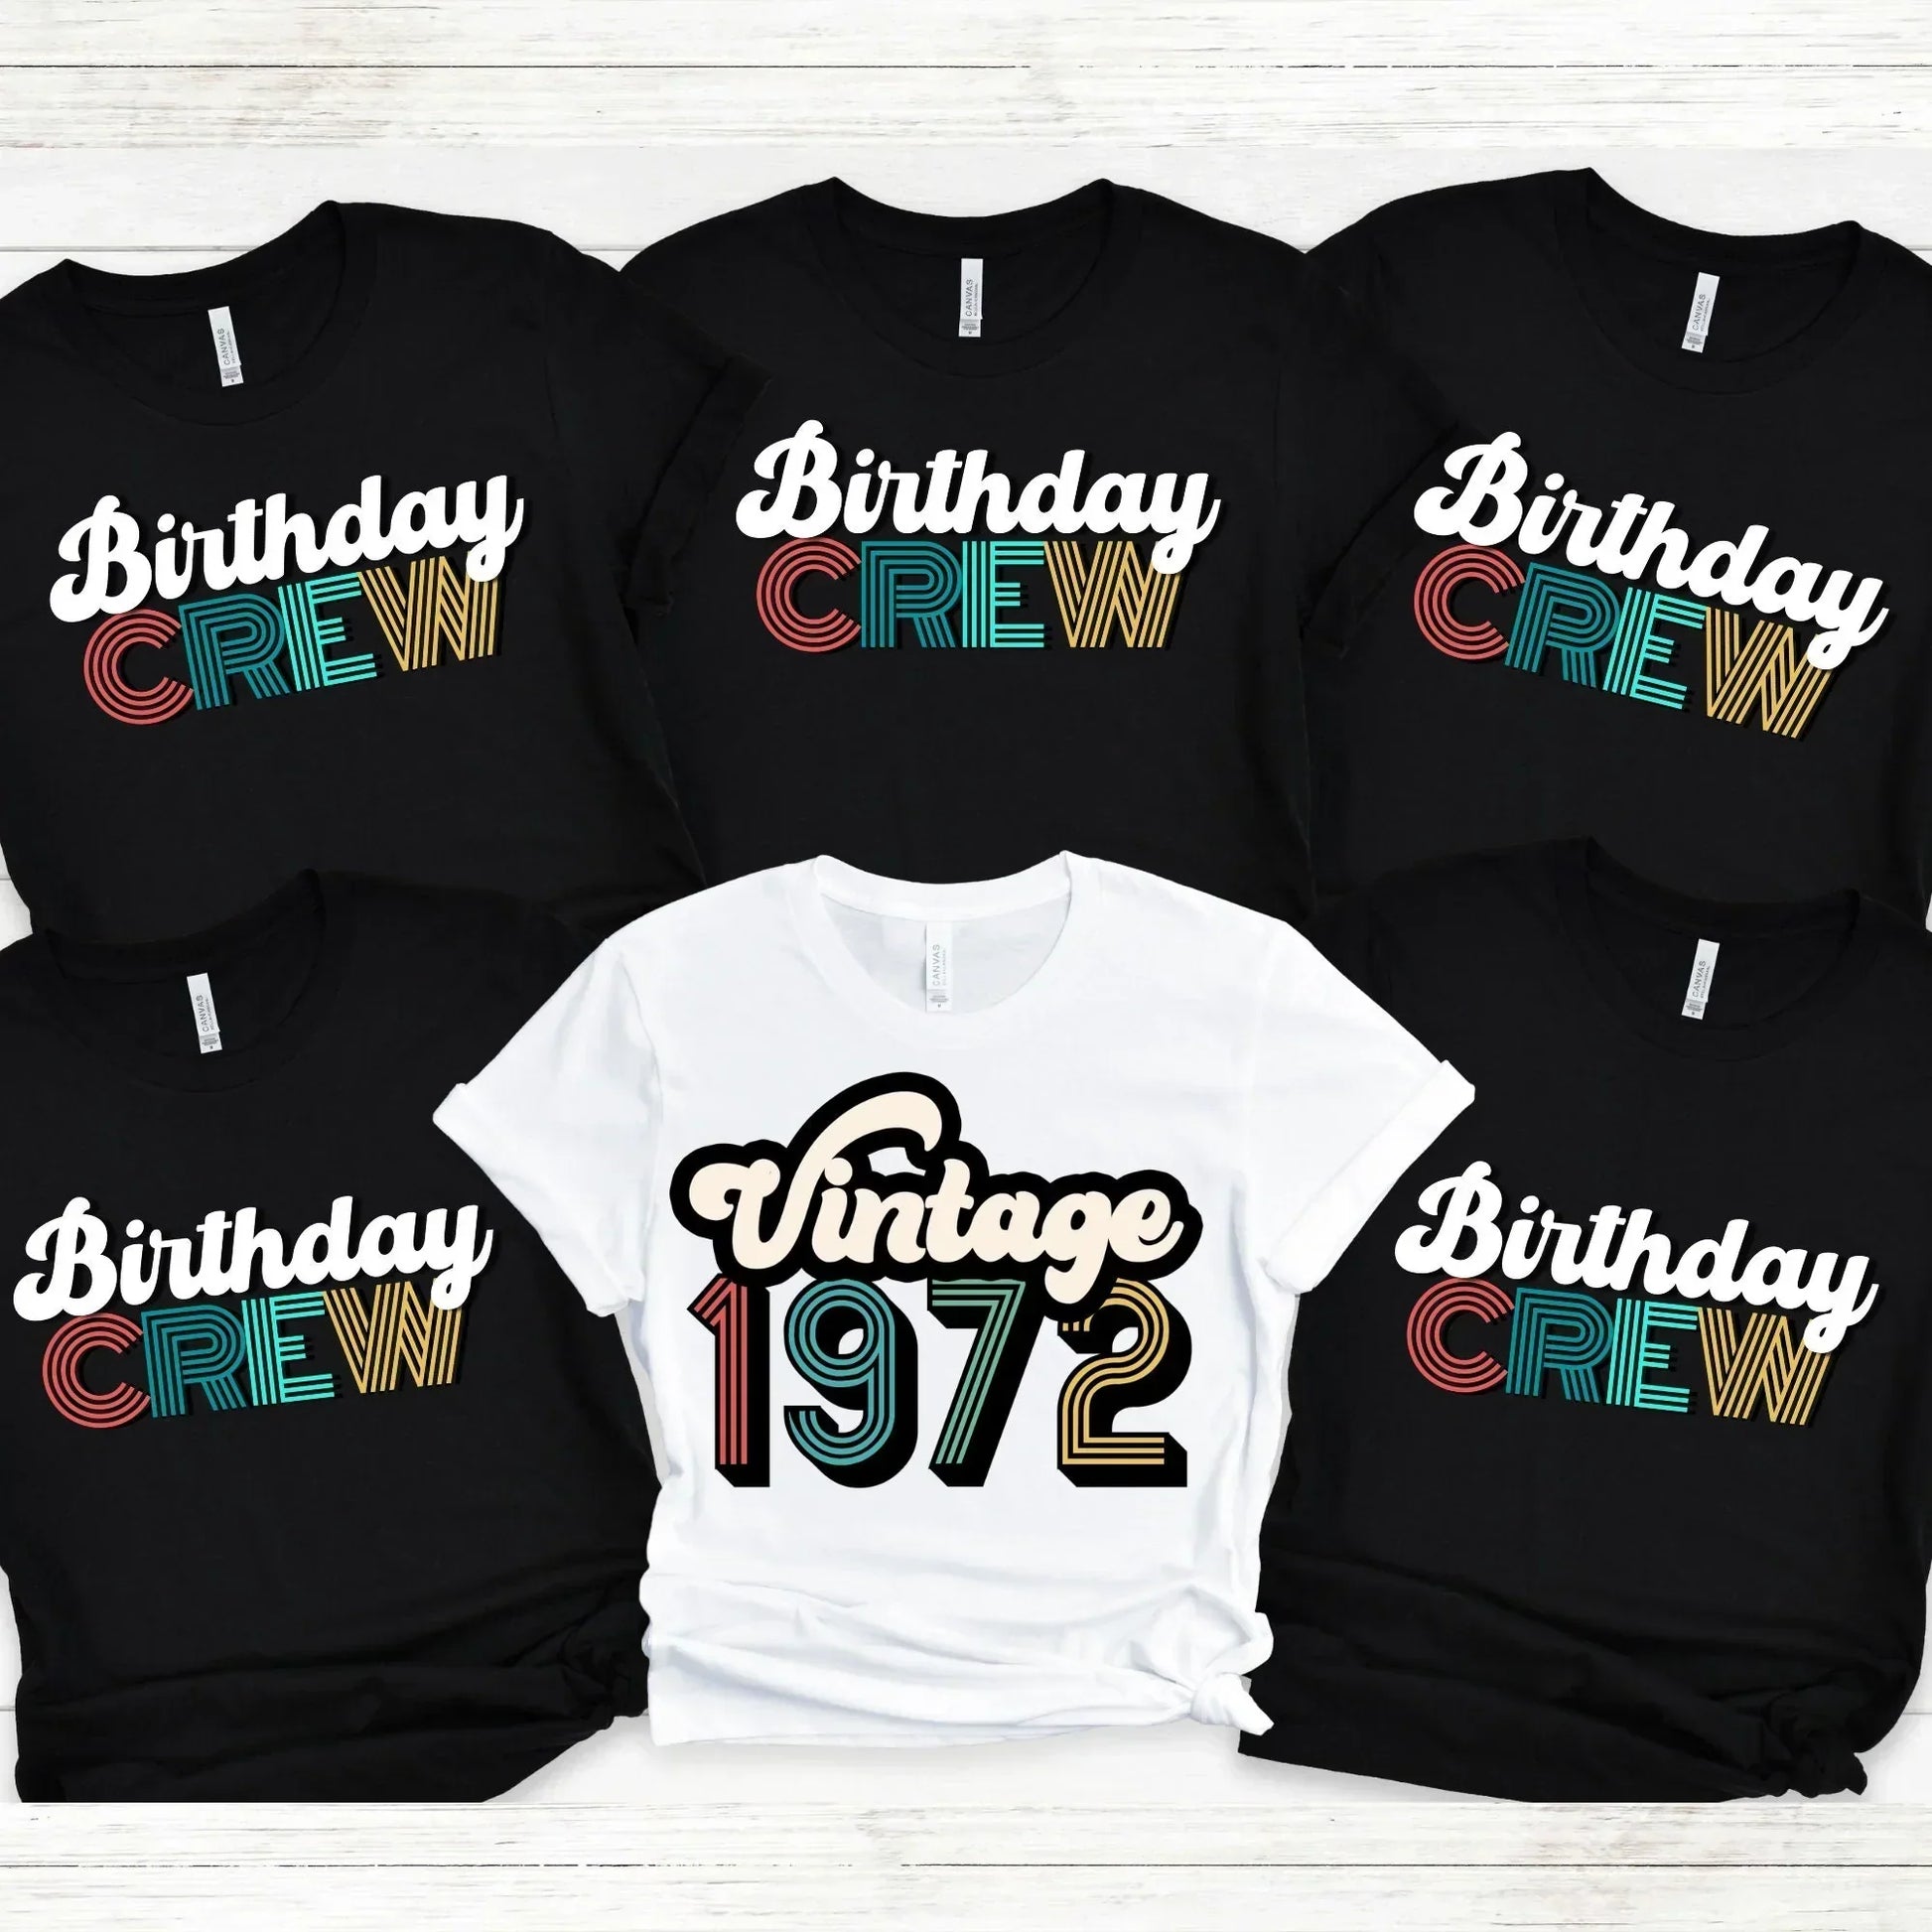 Vintage 1972, 50th Birthday Group Shirt, Birthday Crew, Birthday Squad, 50th Gift for Him, Birthday Gift, Birthday Party Tees, Gift for Him